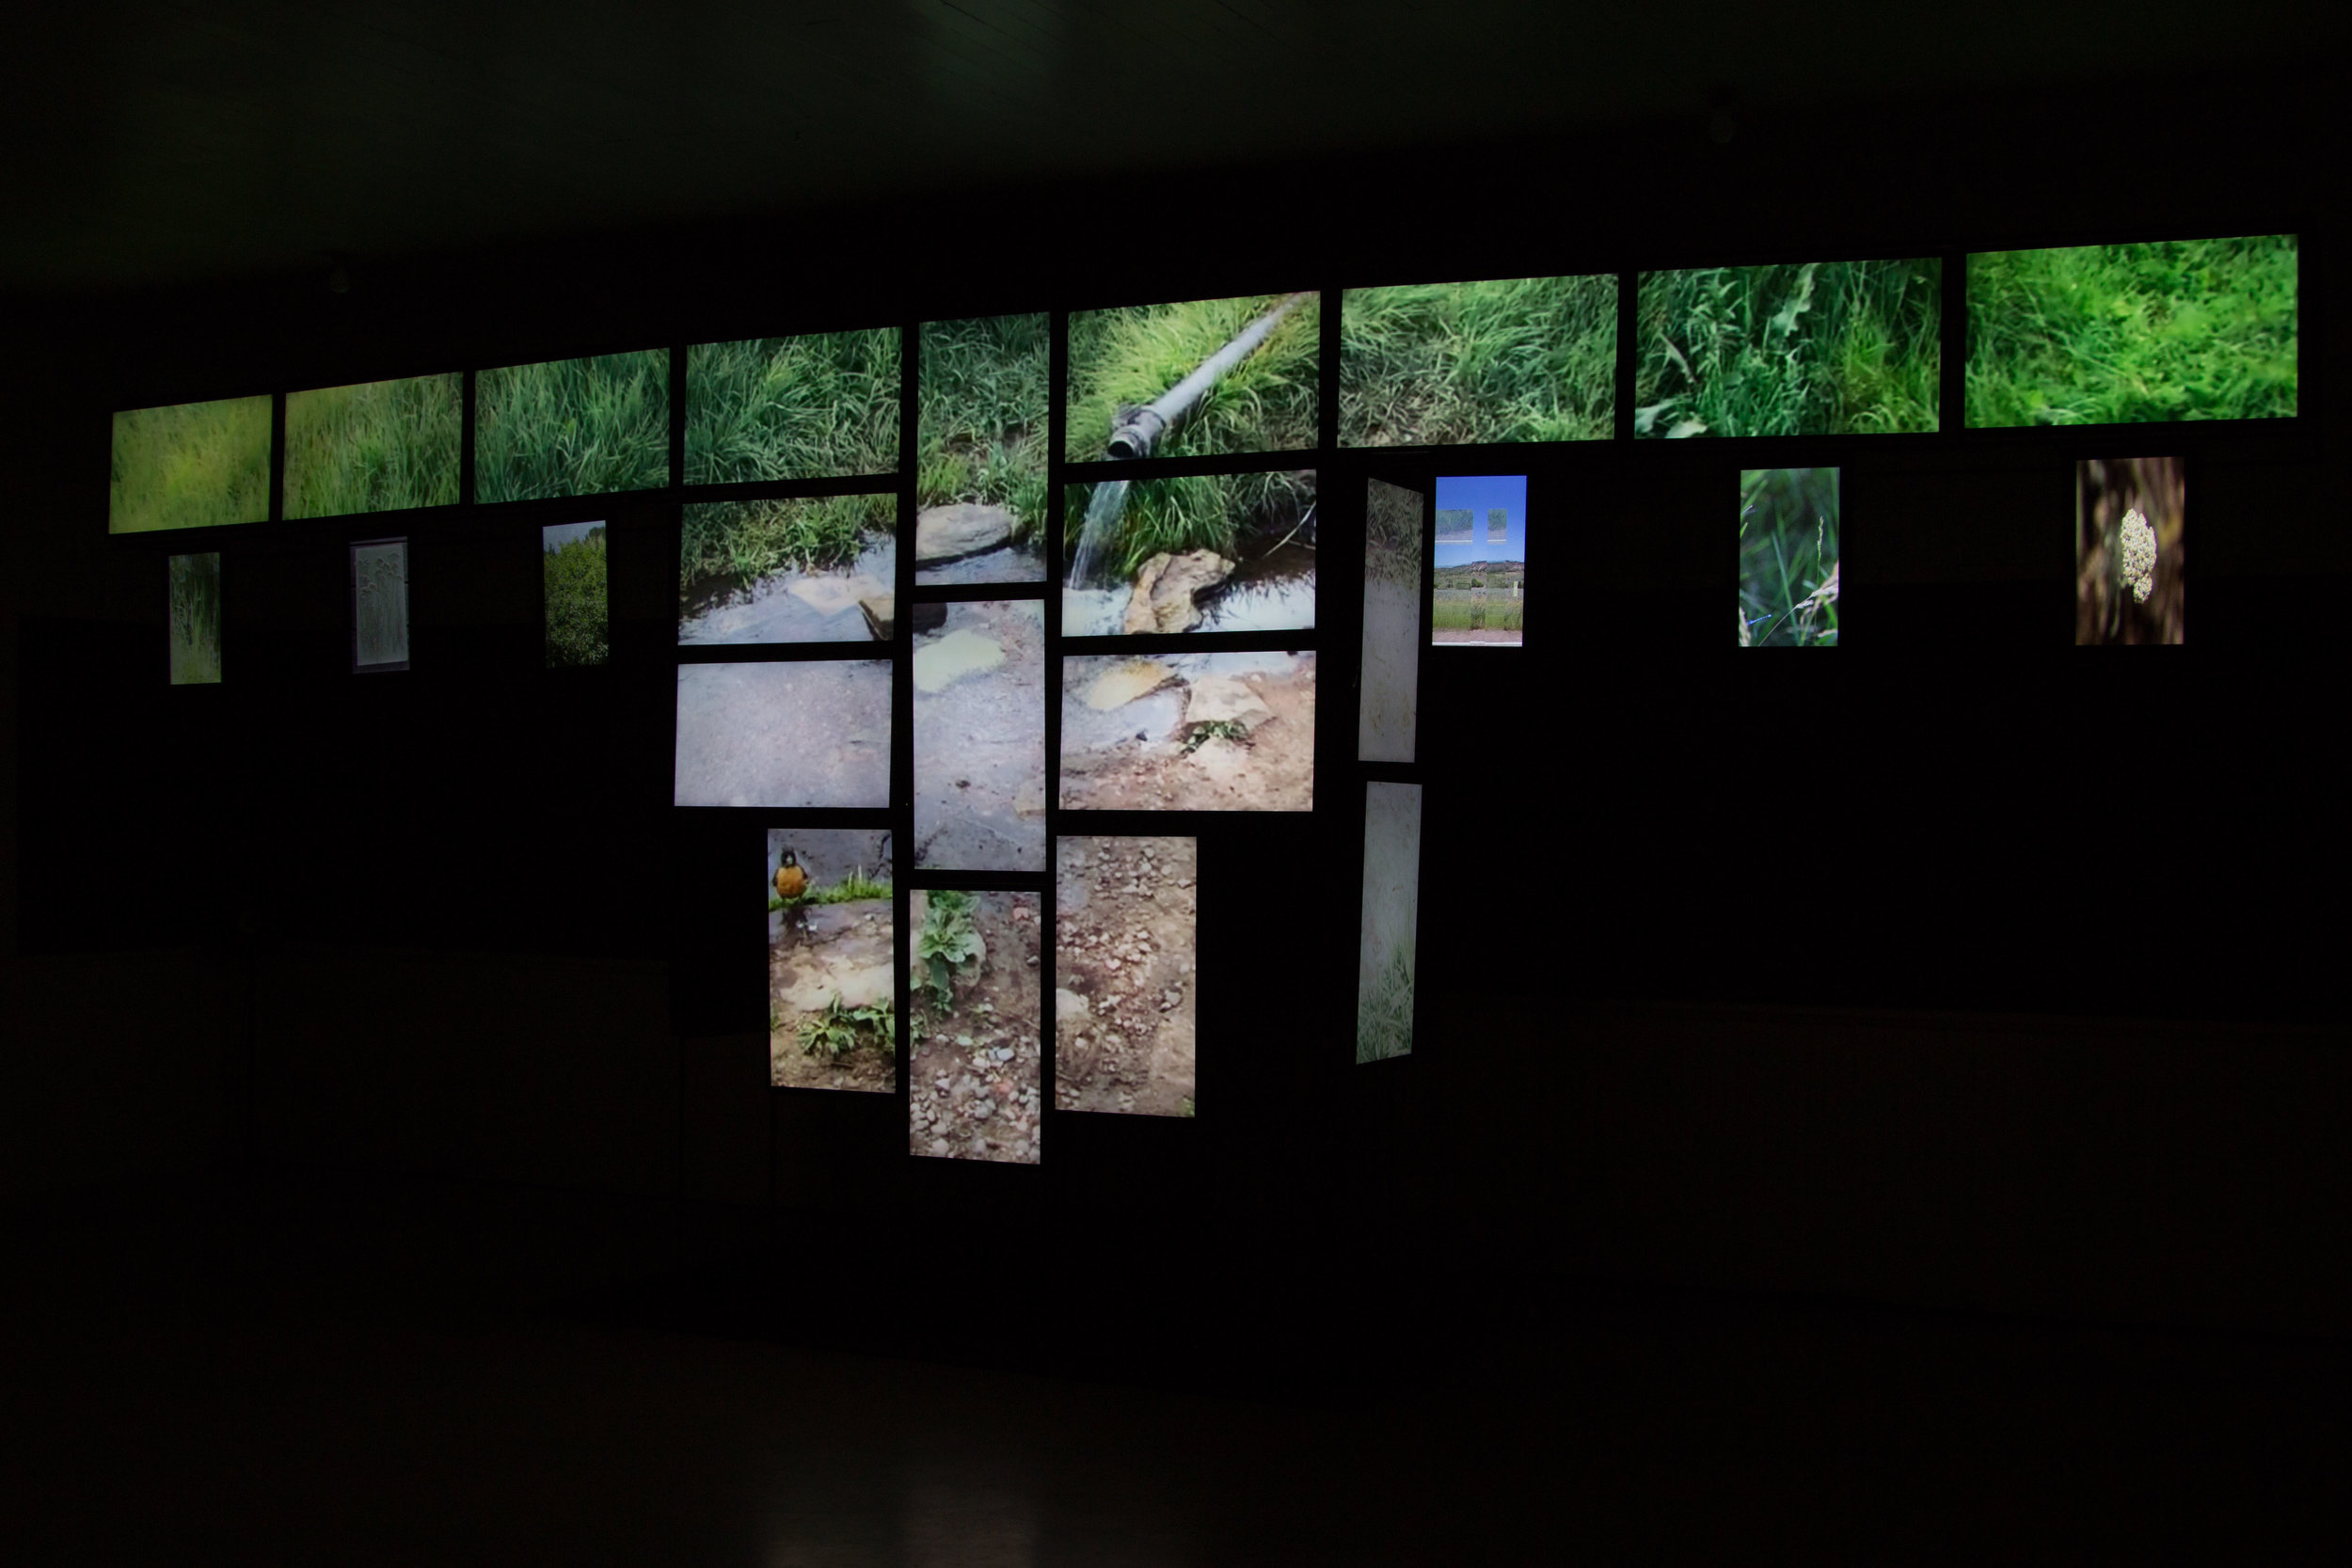  Northern Cheyenne artist Bently Spang's video installation of  War Shirt #6 - Waterways  takes the form of a monumental Plains Indian was shirt using 26 video monitors. 